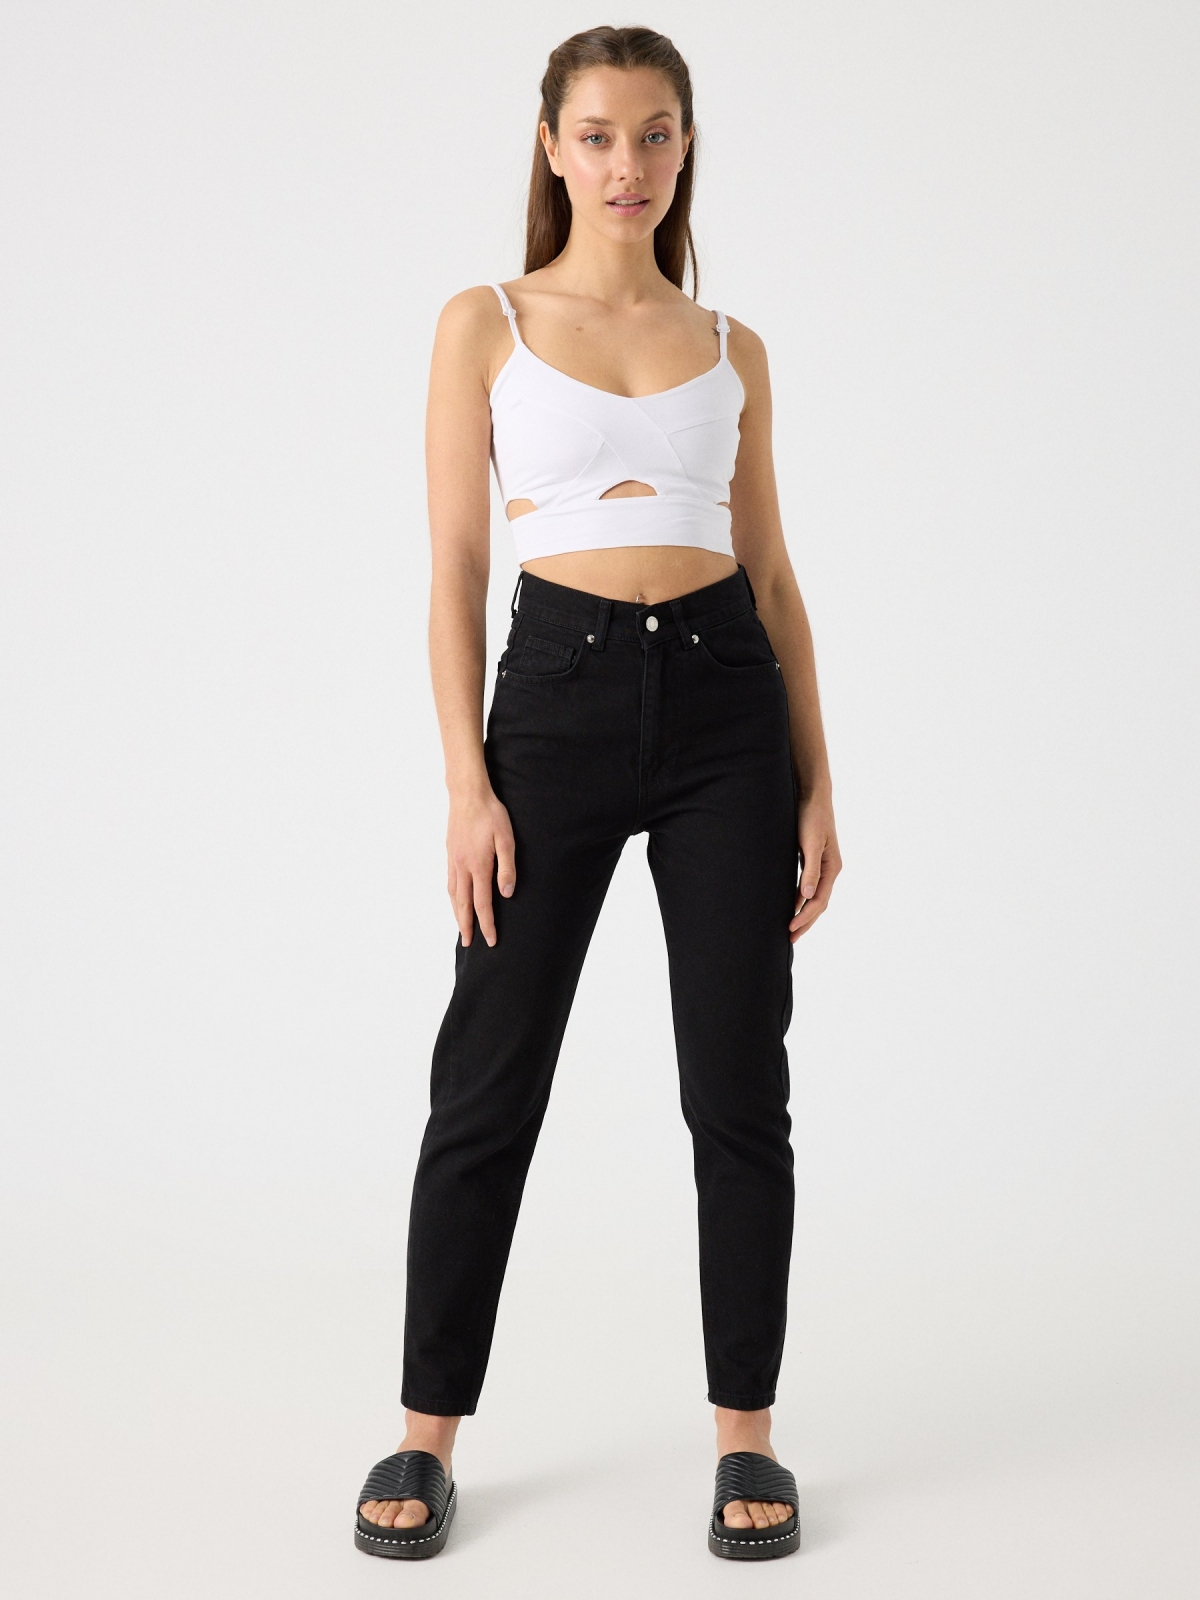 Top cropped cut out blanco vista general frontal